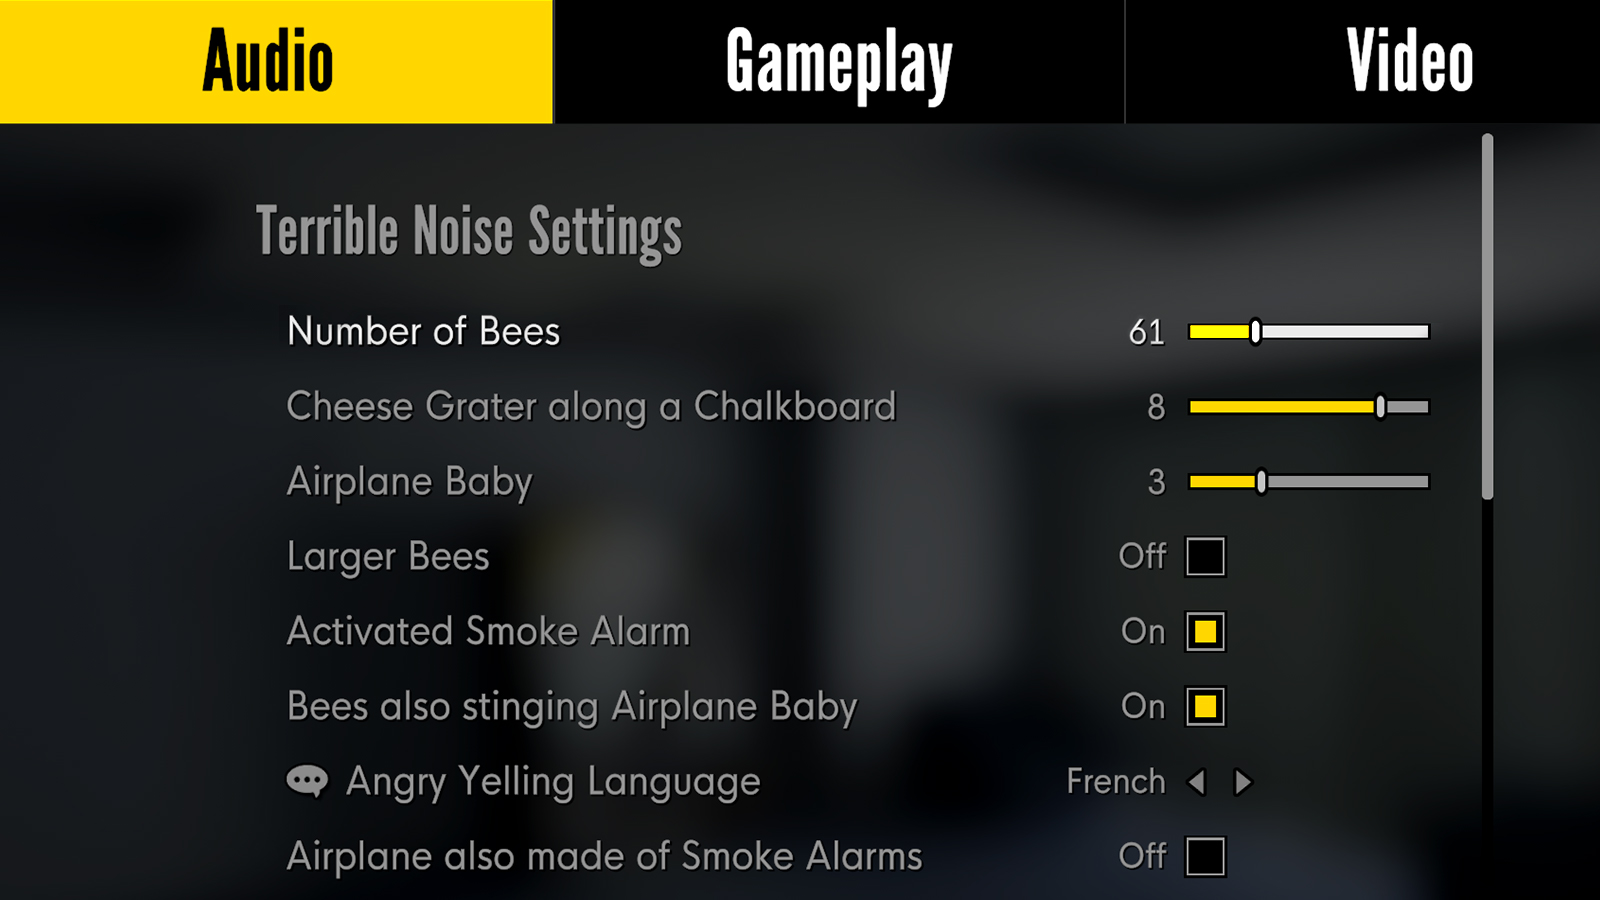 Screenshot of a menu of sliders allowing players to adjust settings like 'dragging cheese grater along a chalkboard', 'larger bees', 'activated smoke alarm', 'baby crying in airplane made of cheese graters and chalkboards', 'bees also stinging airplane baby', 'airplane also made of smoke alarms'